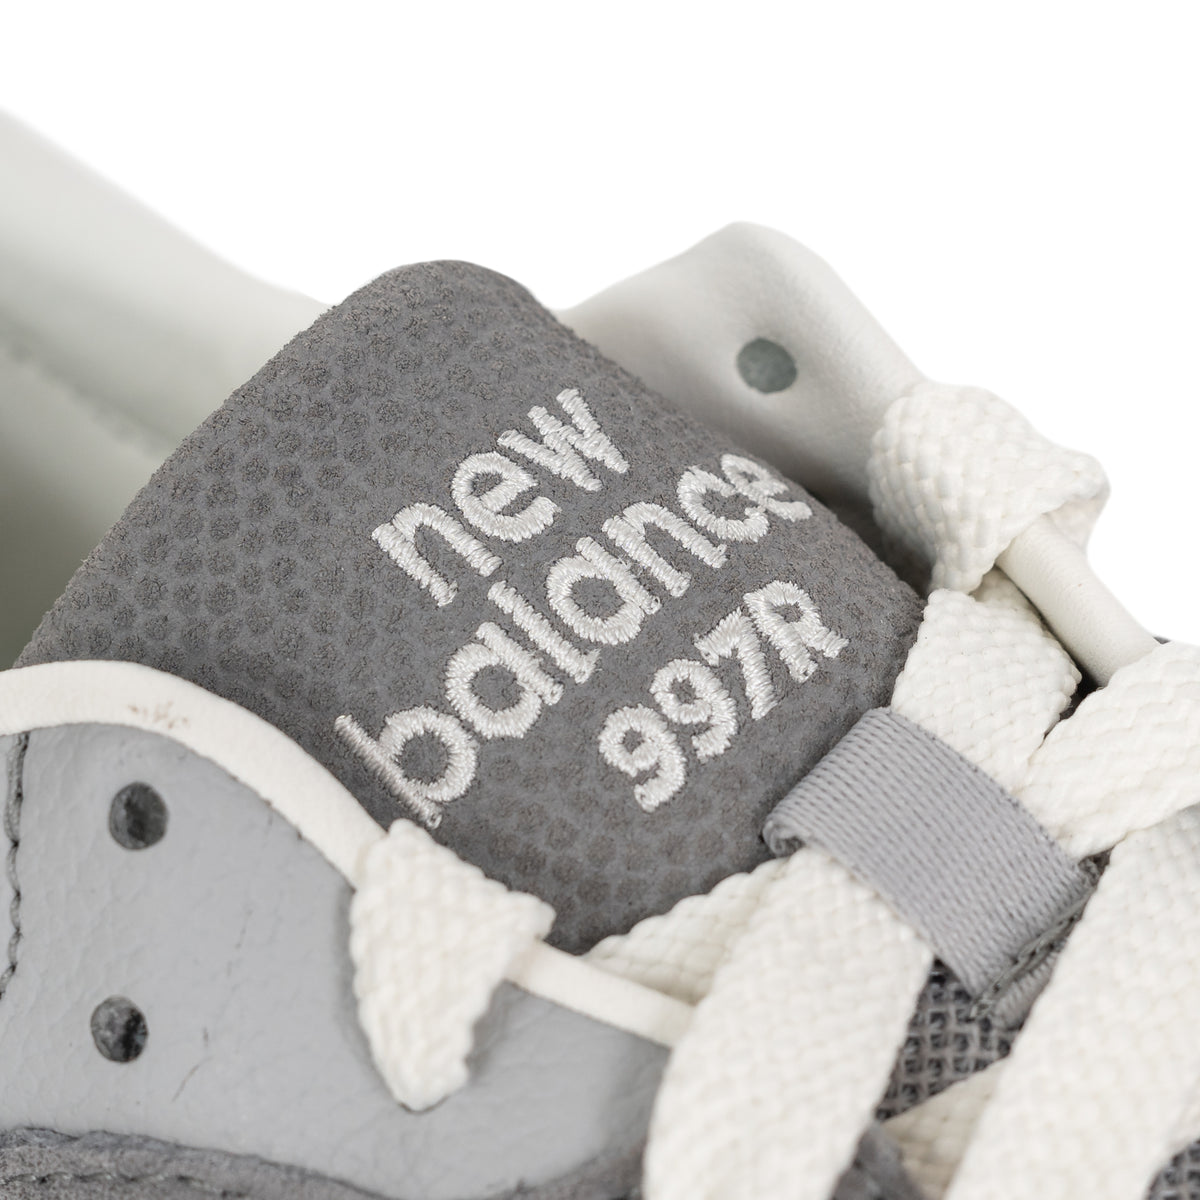 Load image into Gallery viewer, New Balance Shadow Grey 997
